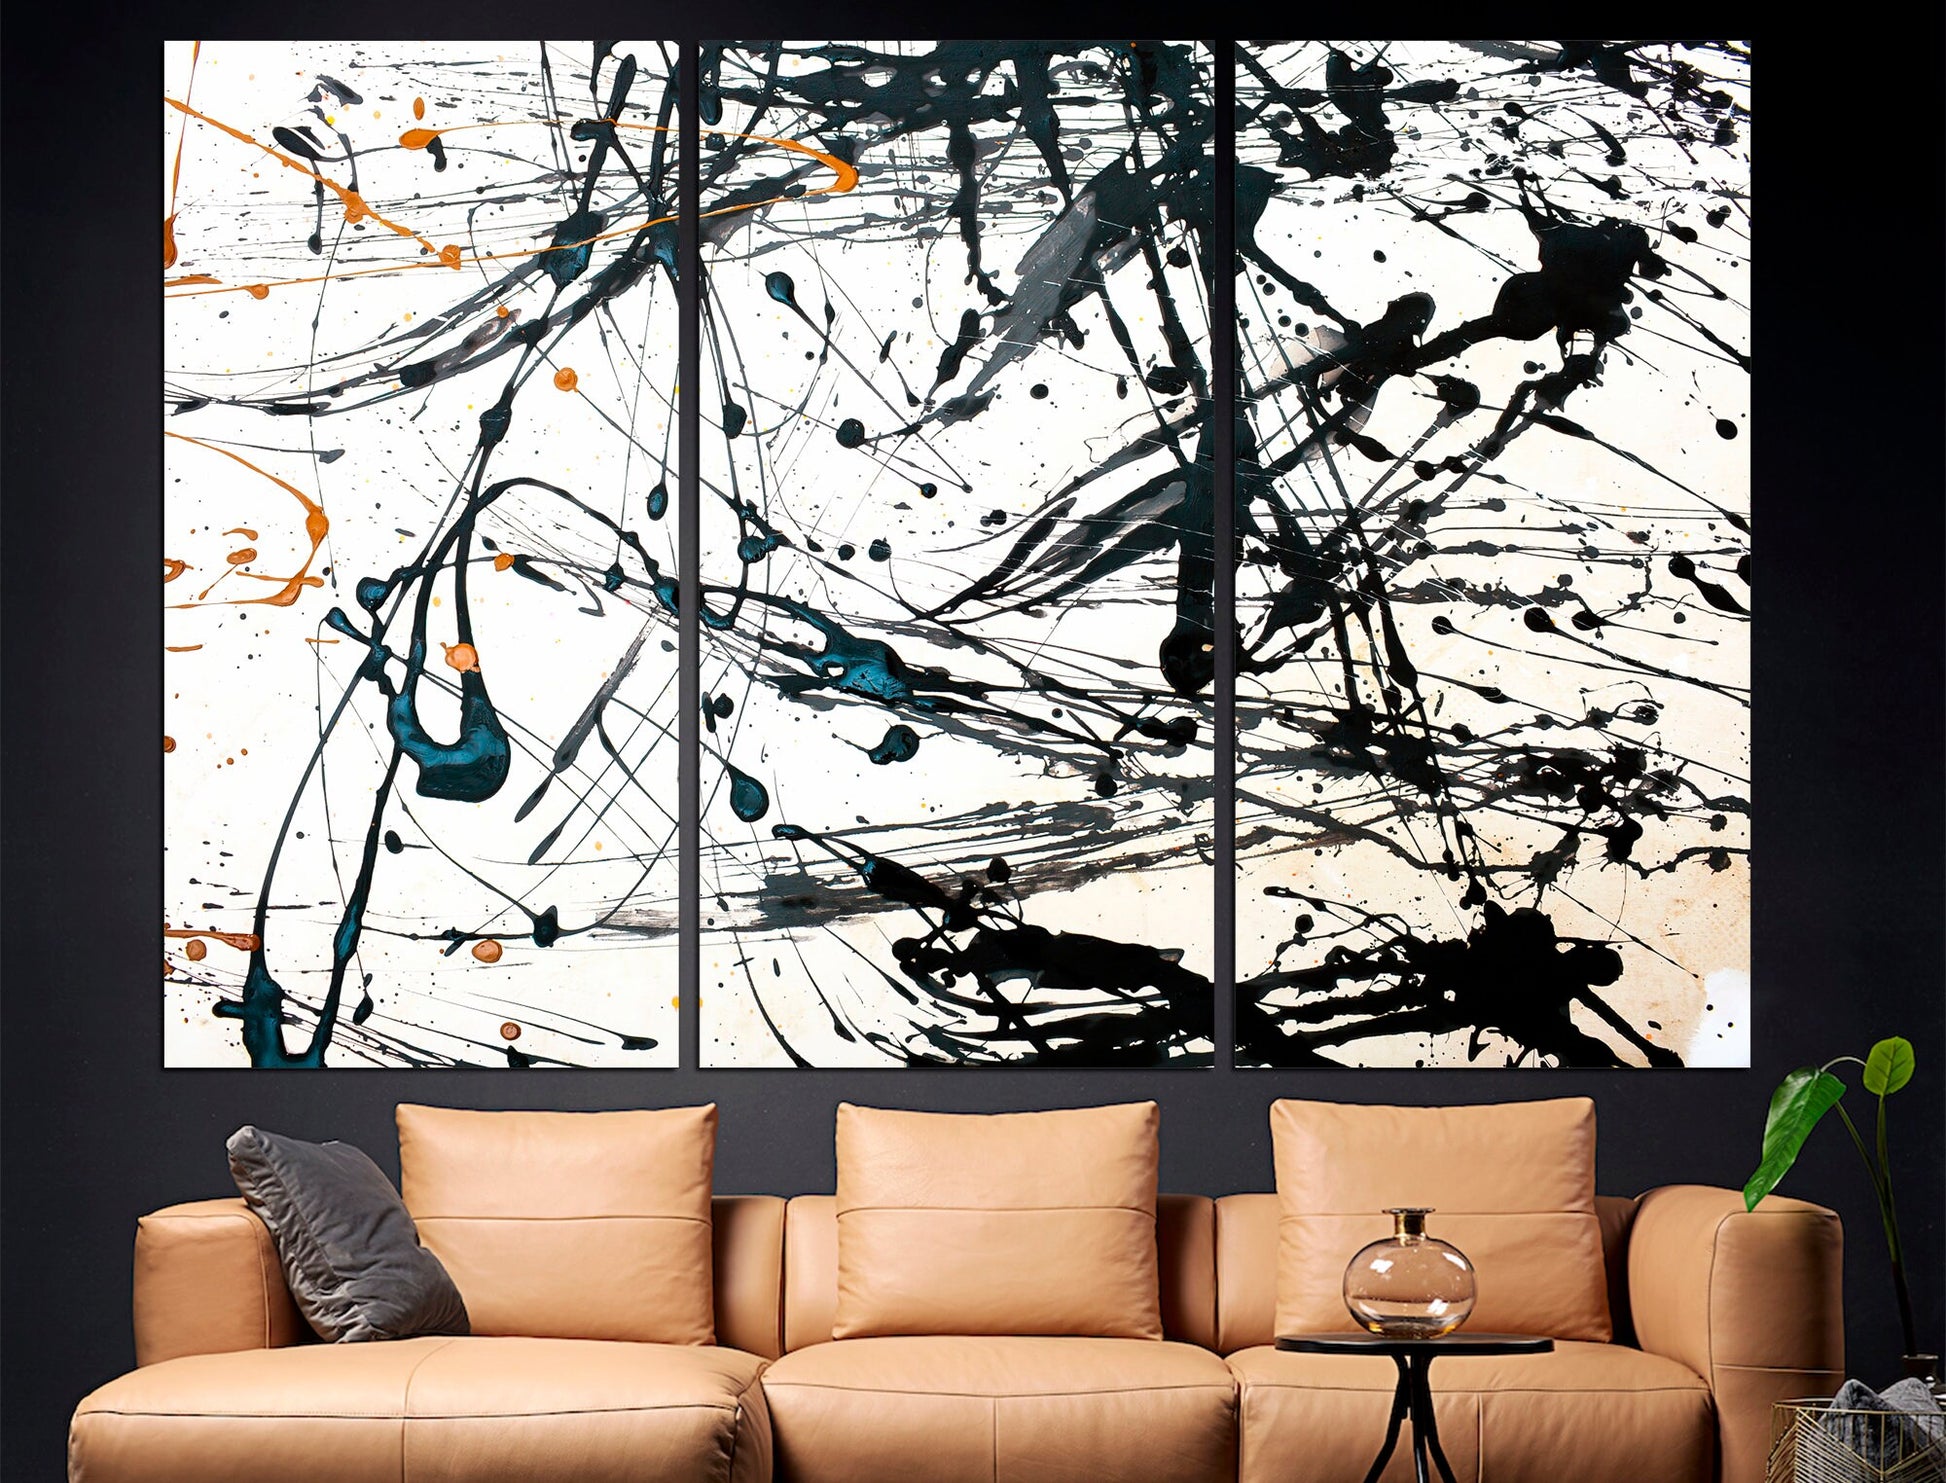 Abstraction canvas Black and white art Large canvas art, Home decor wall art Modern abstract art Abstract decor